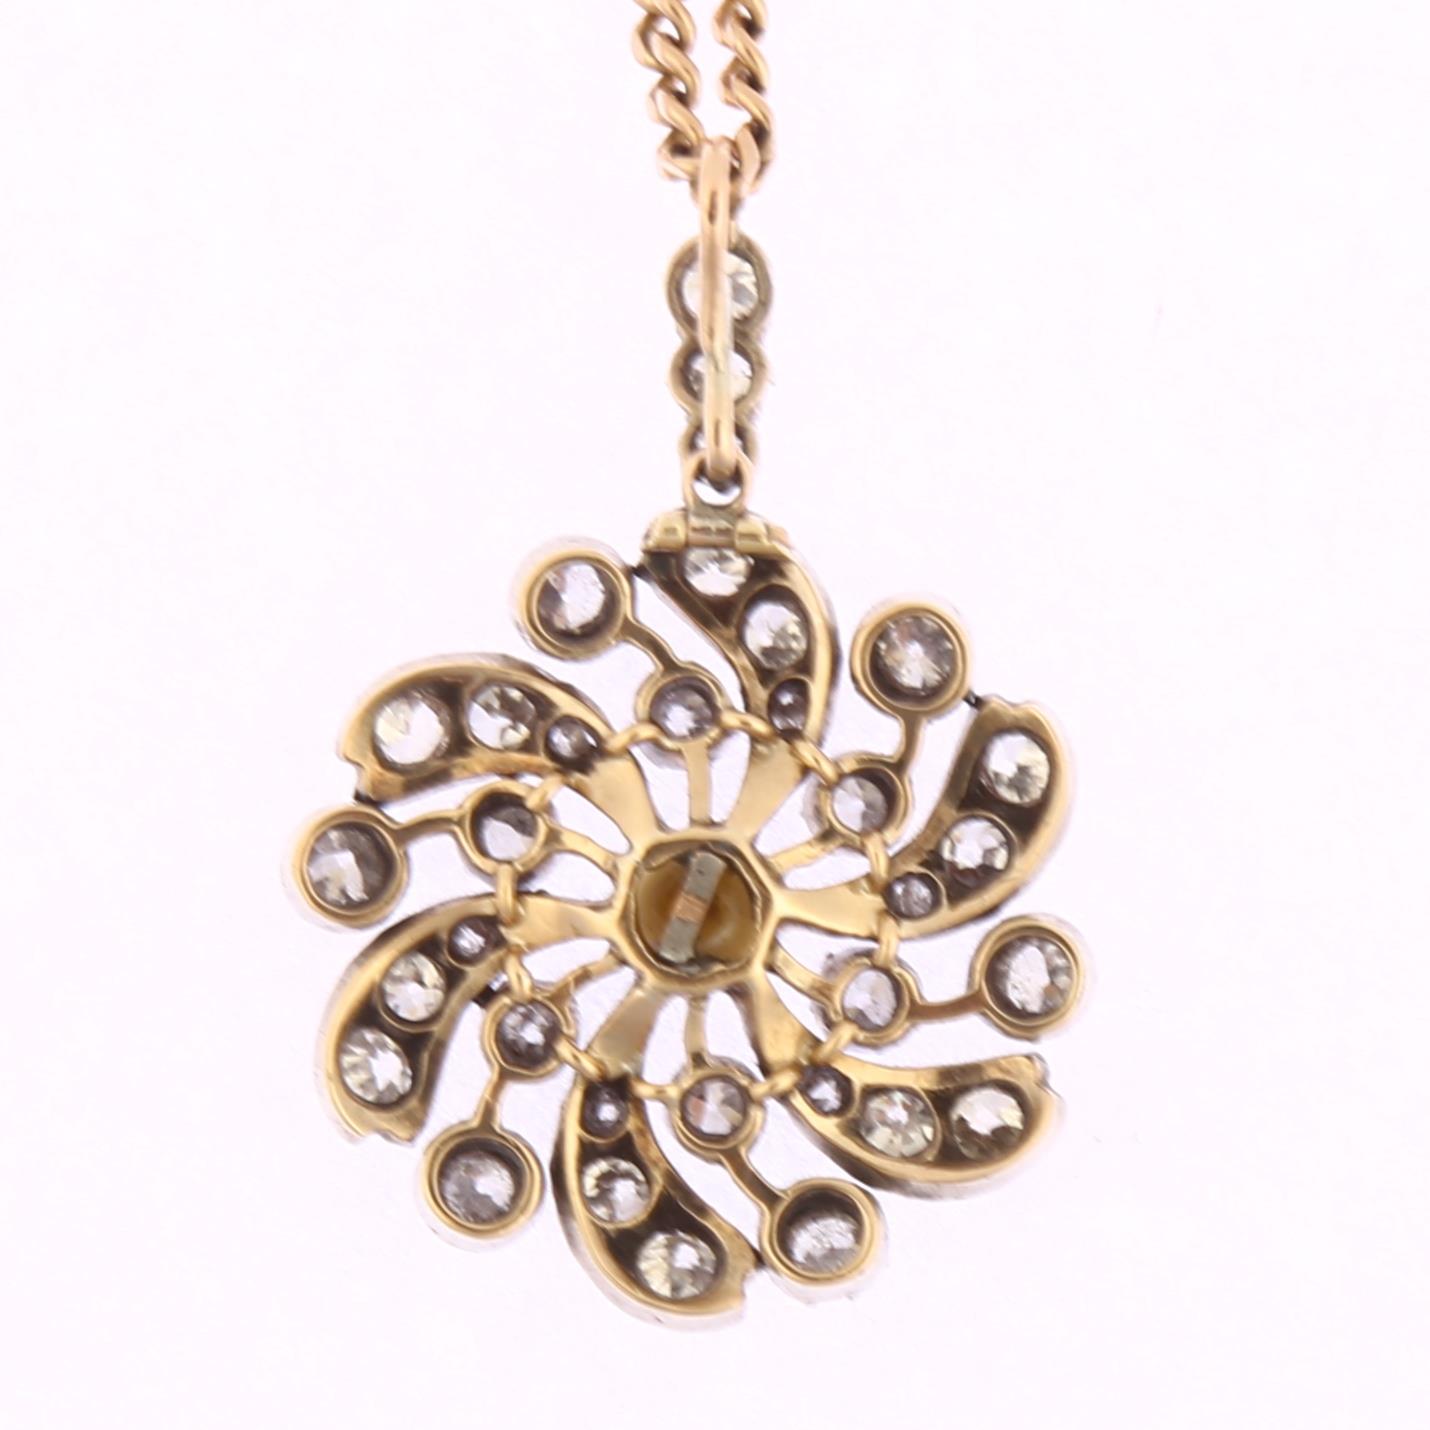 A Victorian natural pearl and diamond flowerhead pendant necklace, circa 1880, unmarked silver and - Image 3 of 4